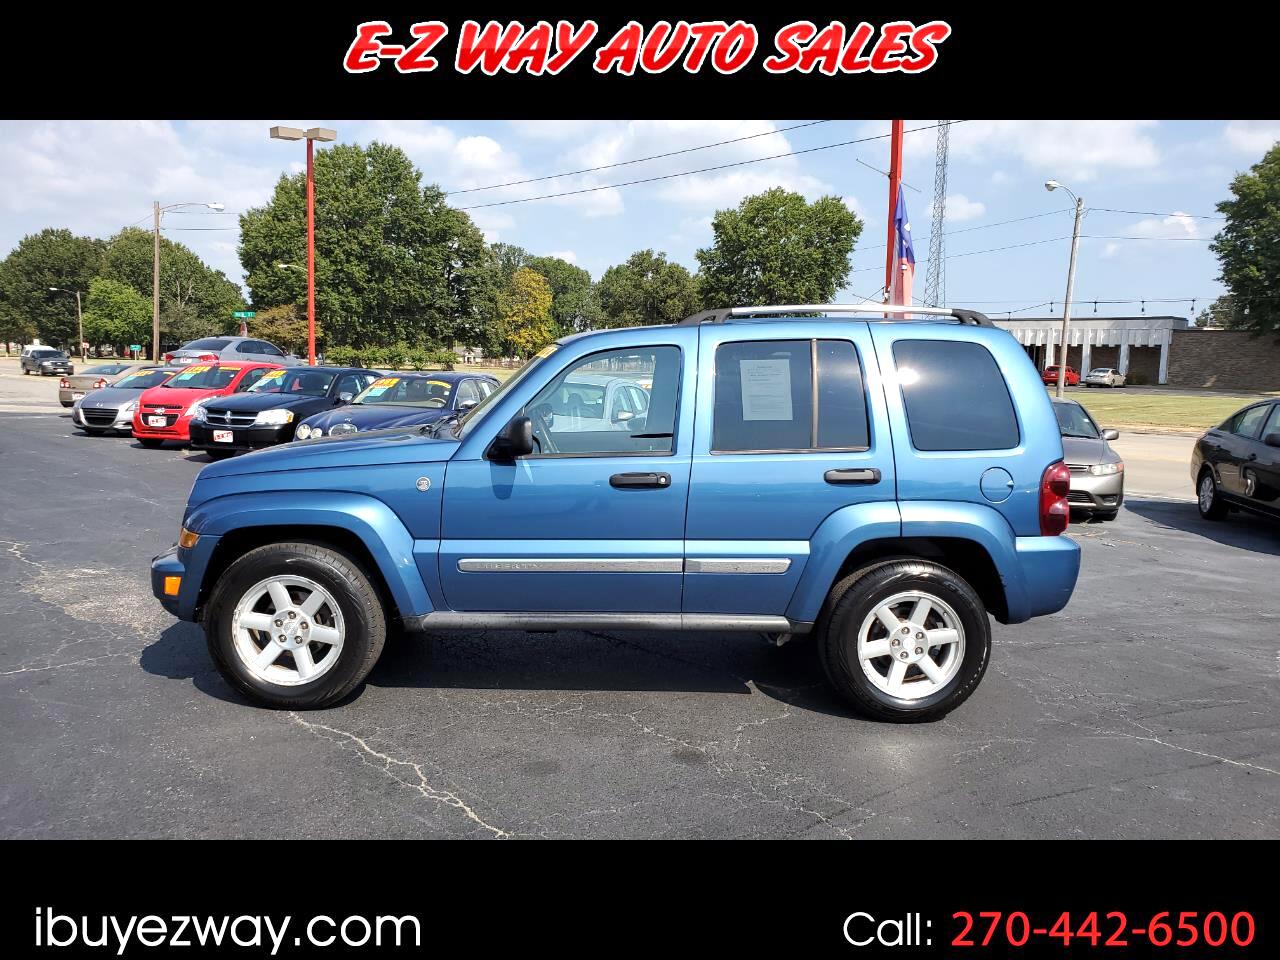 Used Cars For Sale Paducah Ky 42003 E Z Way Auto Sales